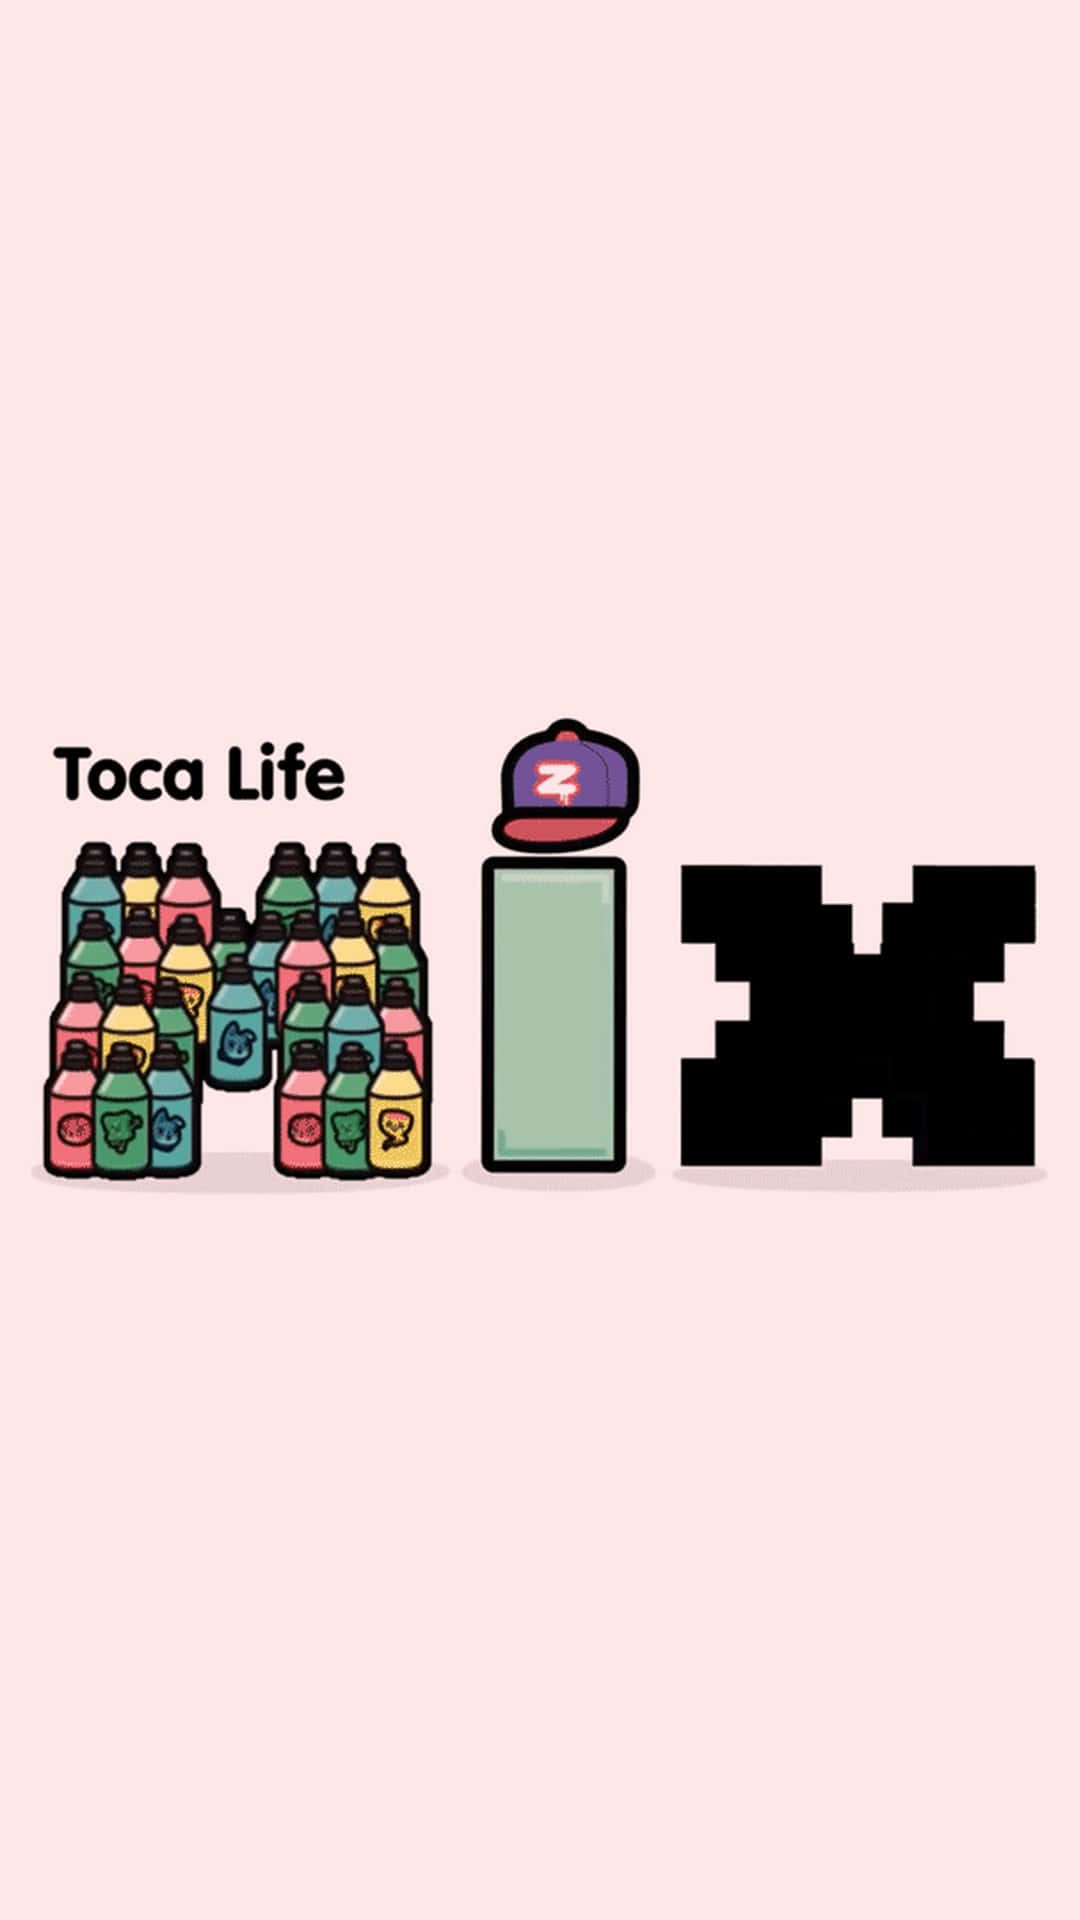 A Bottle Of Toca Life With A Bottle Of Water